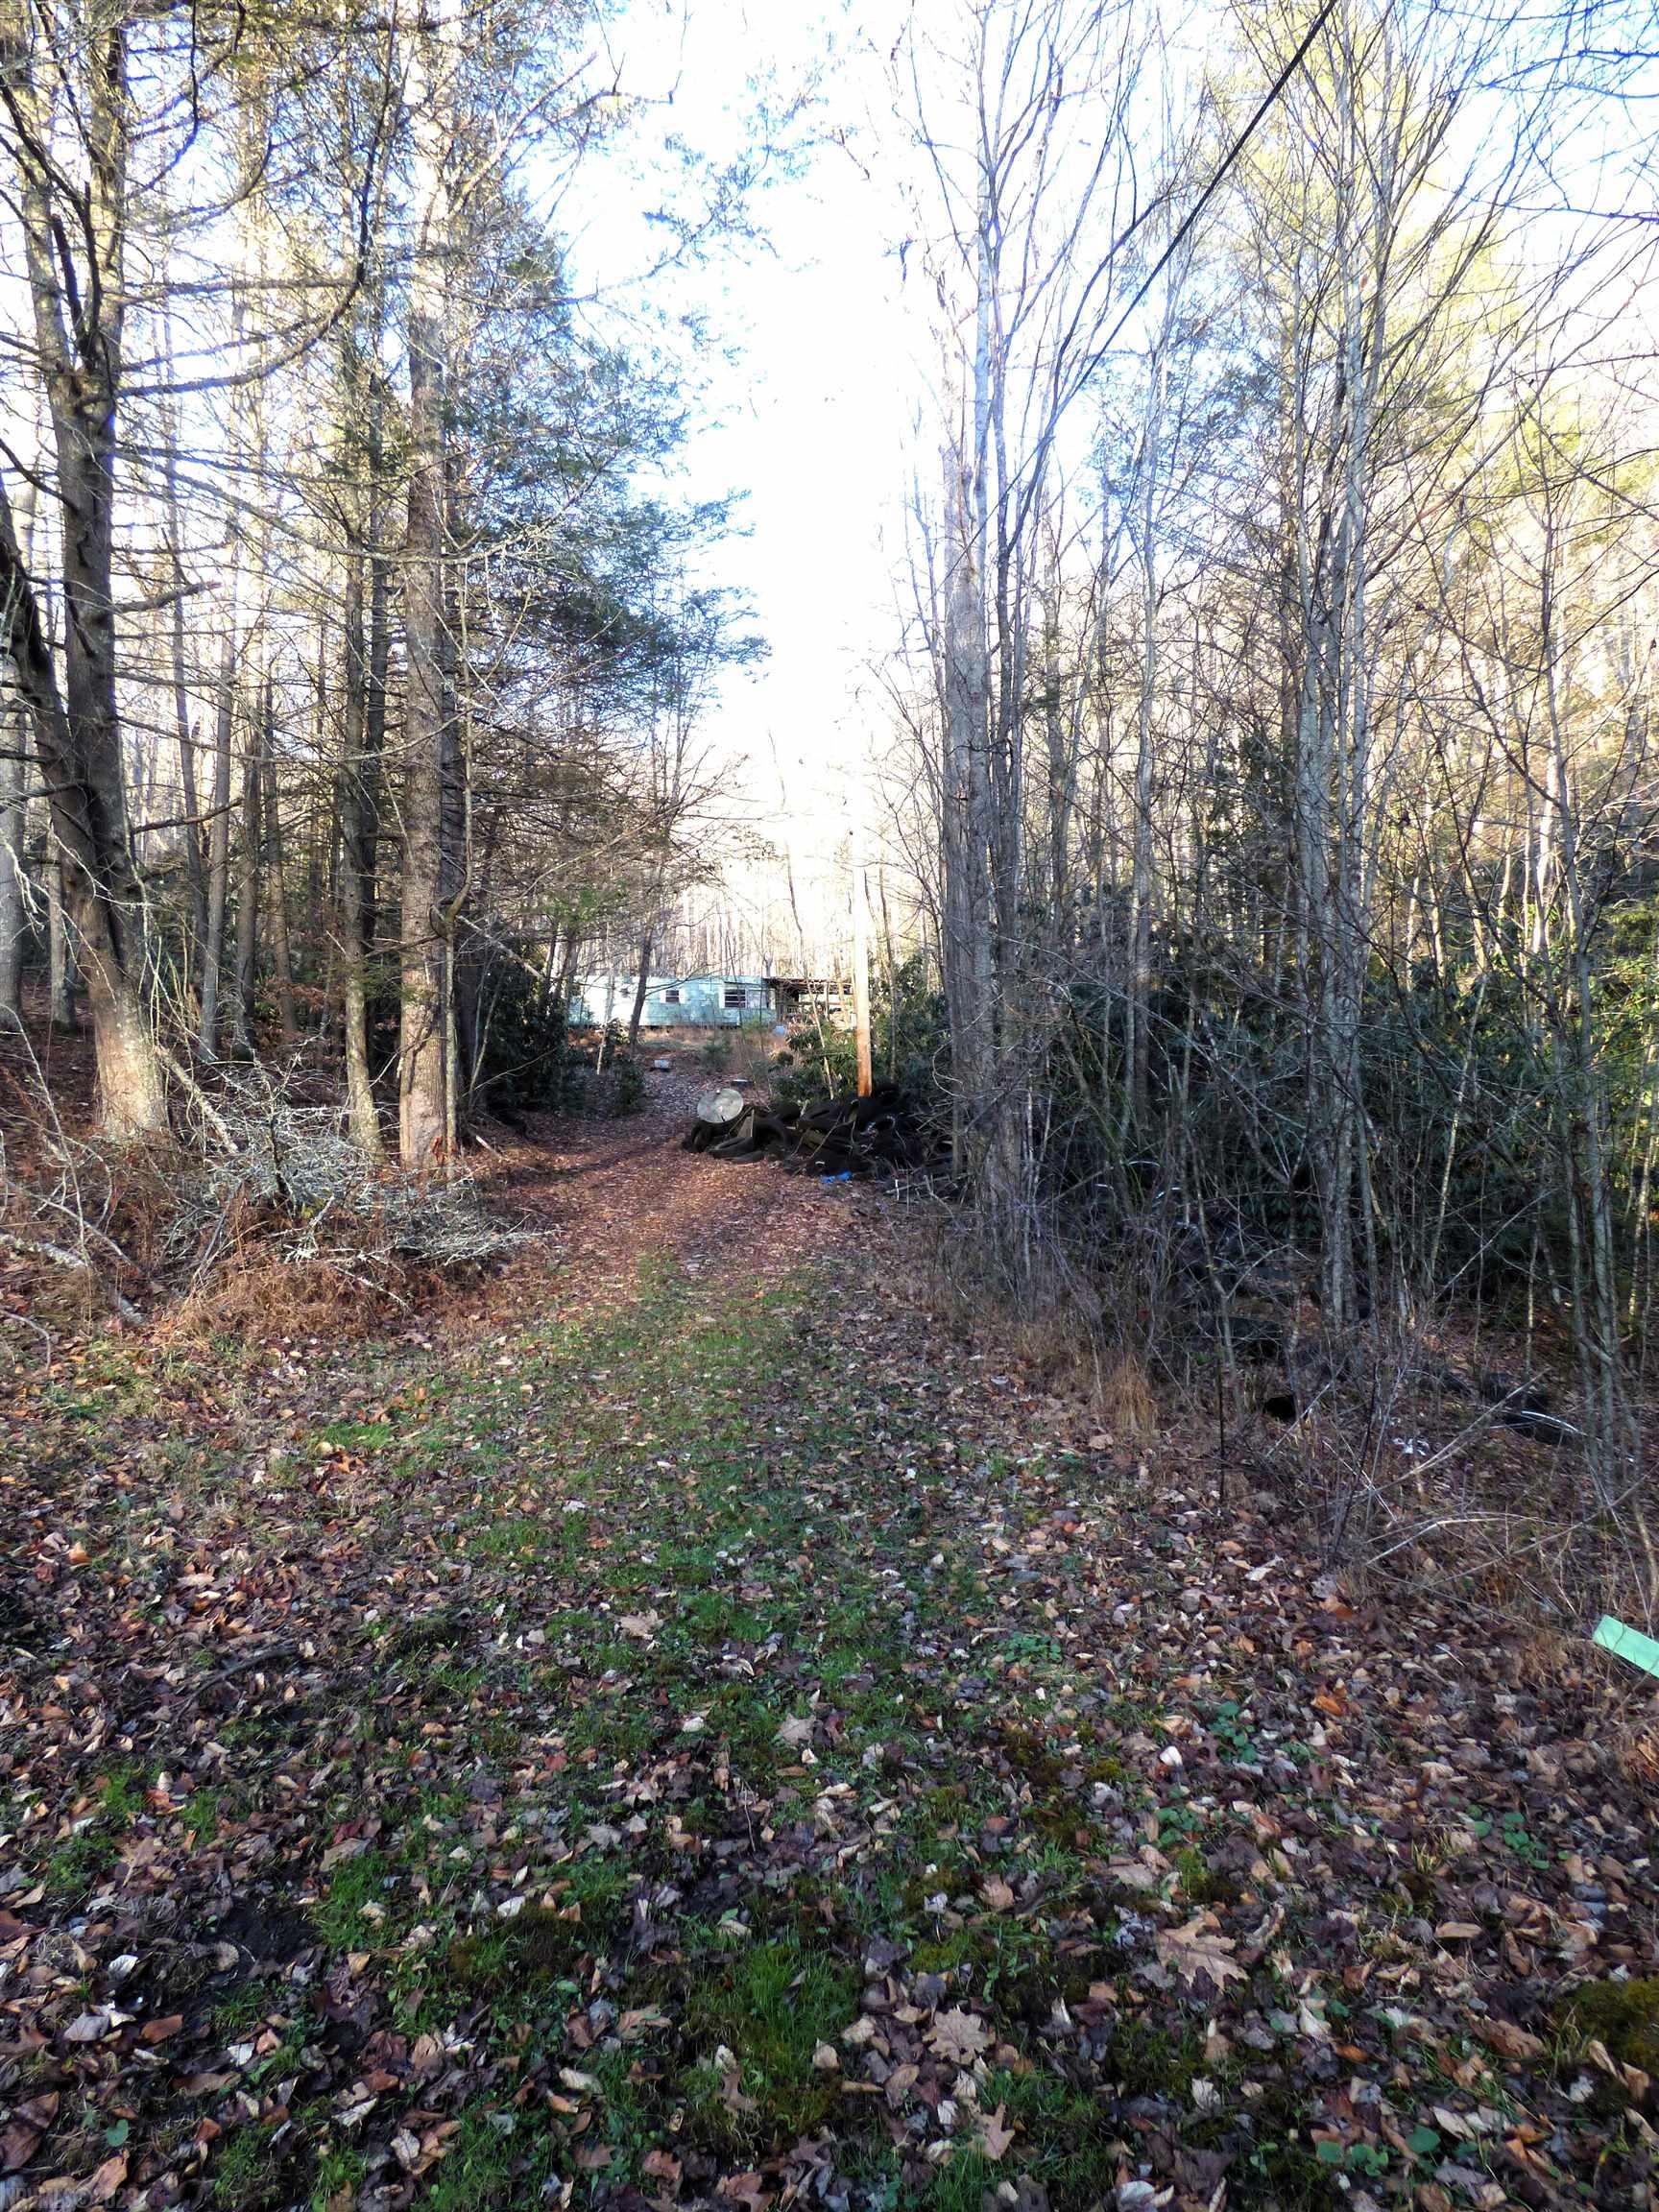 Here is a beautiful 37 acre tract of land ready for its new owners. Property joins Hungry Mother State Park, has great hunting, and serenity. With some tlc this property could be turned into an oasis for a hunting get away, vacation home, camping, or build a cabin for an Air BnB. Check this one out today! Additional owners. Teresa Michele Williams, Crystal Marie Billings.